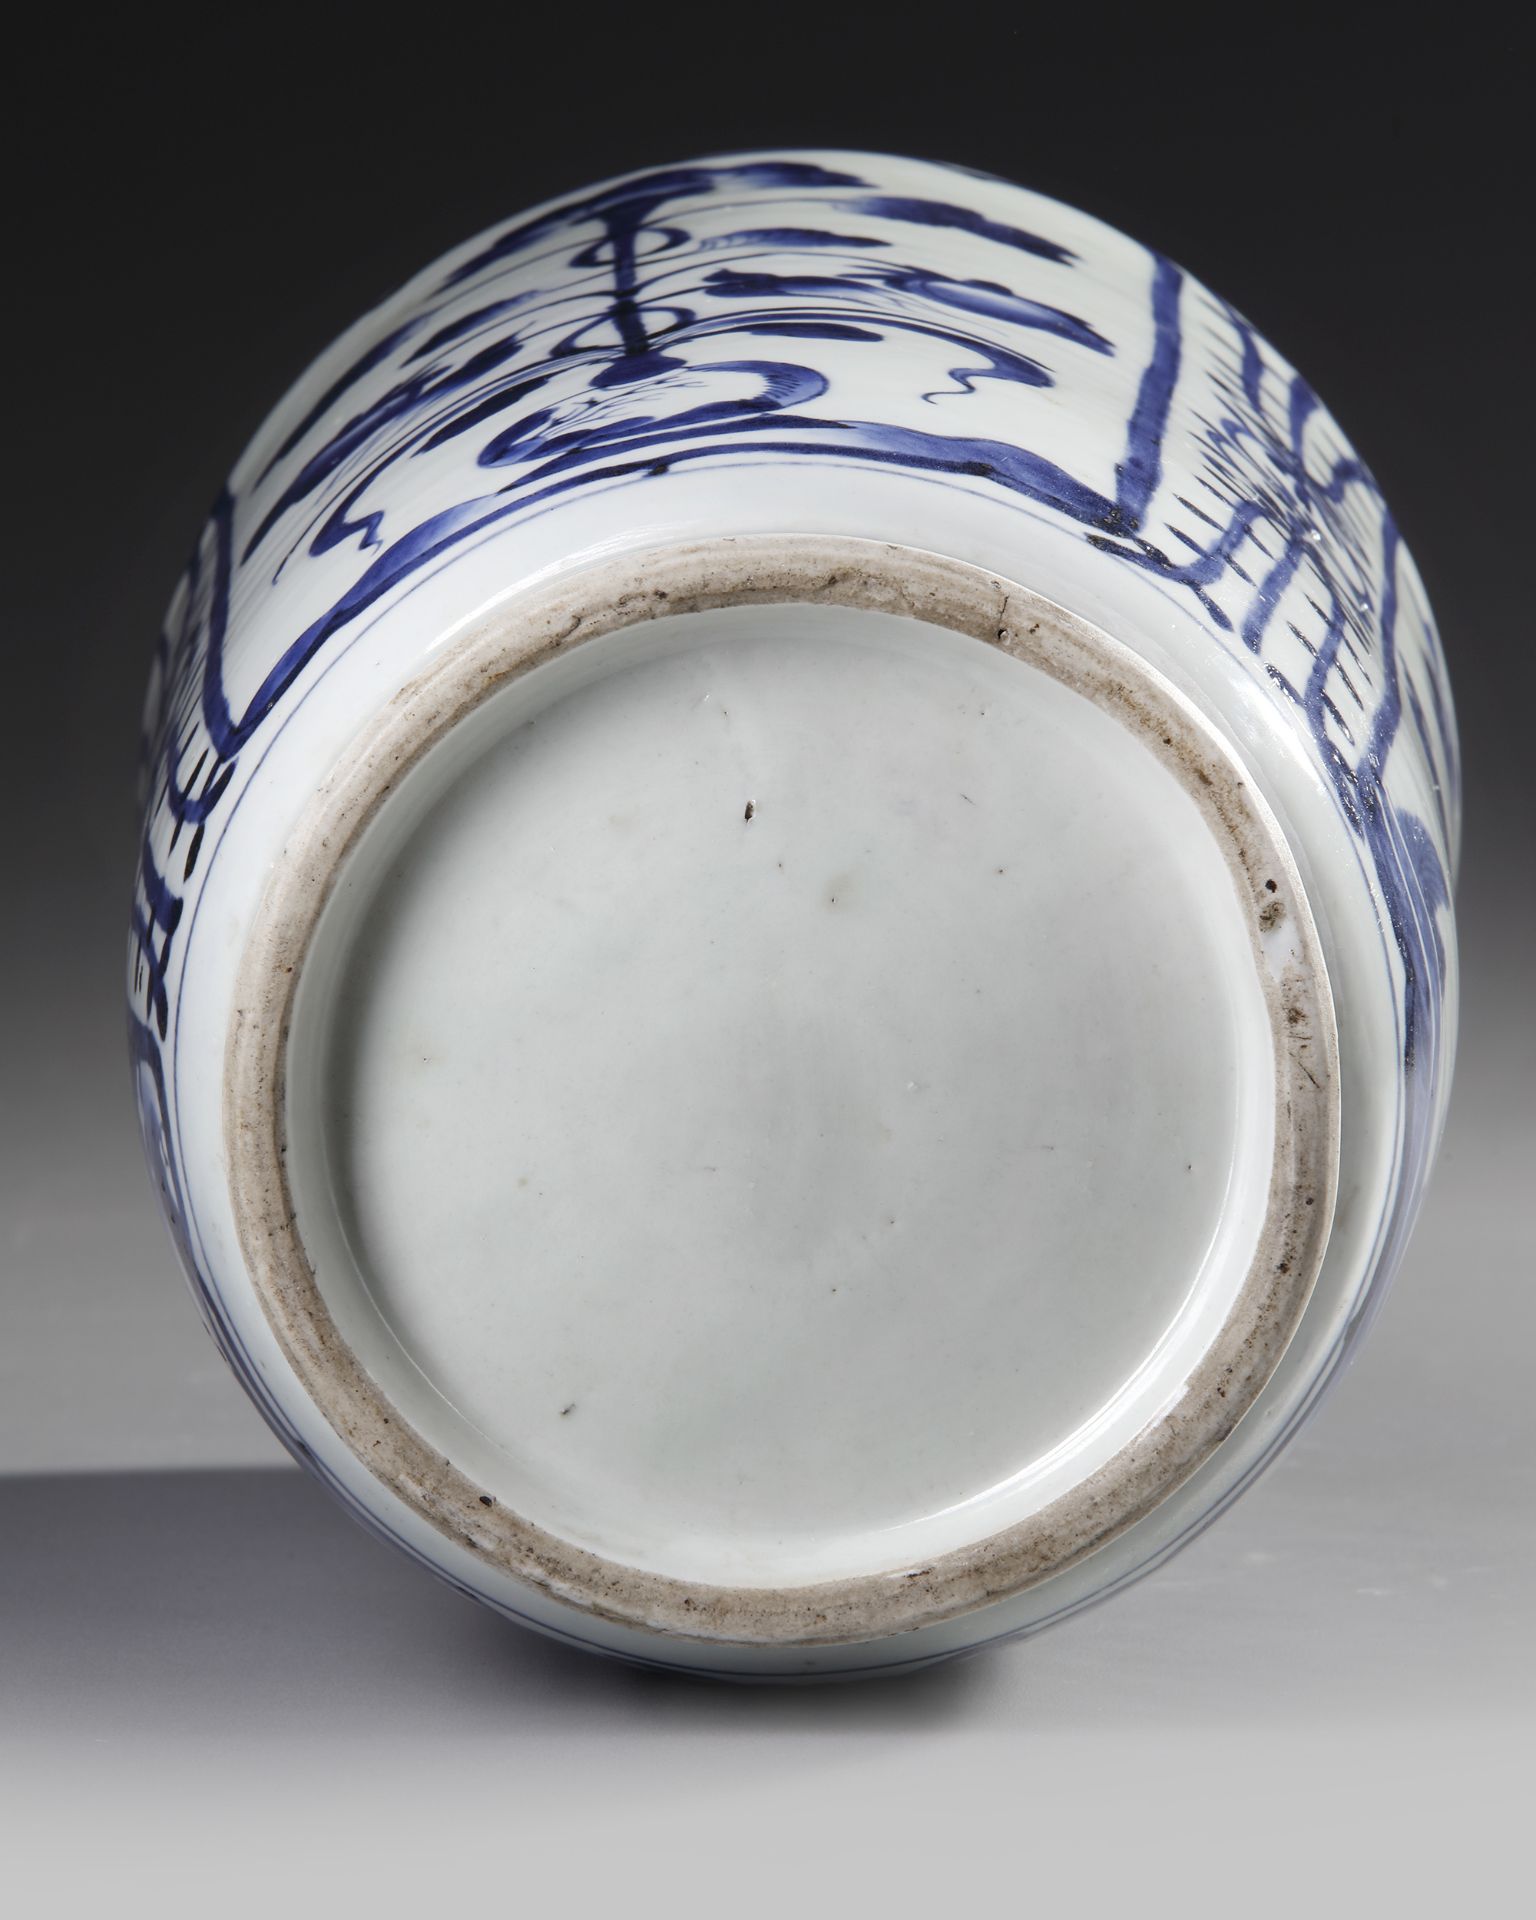 A JAPANESE BLUE AND WHITE CYLINDRICAL ARITA VASE, LATE 17TH CENTURY - Image 3 of 4